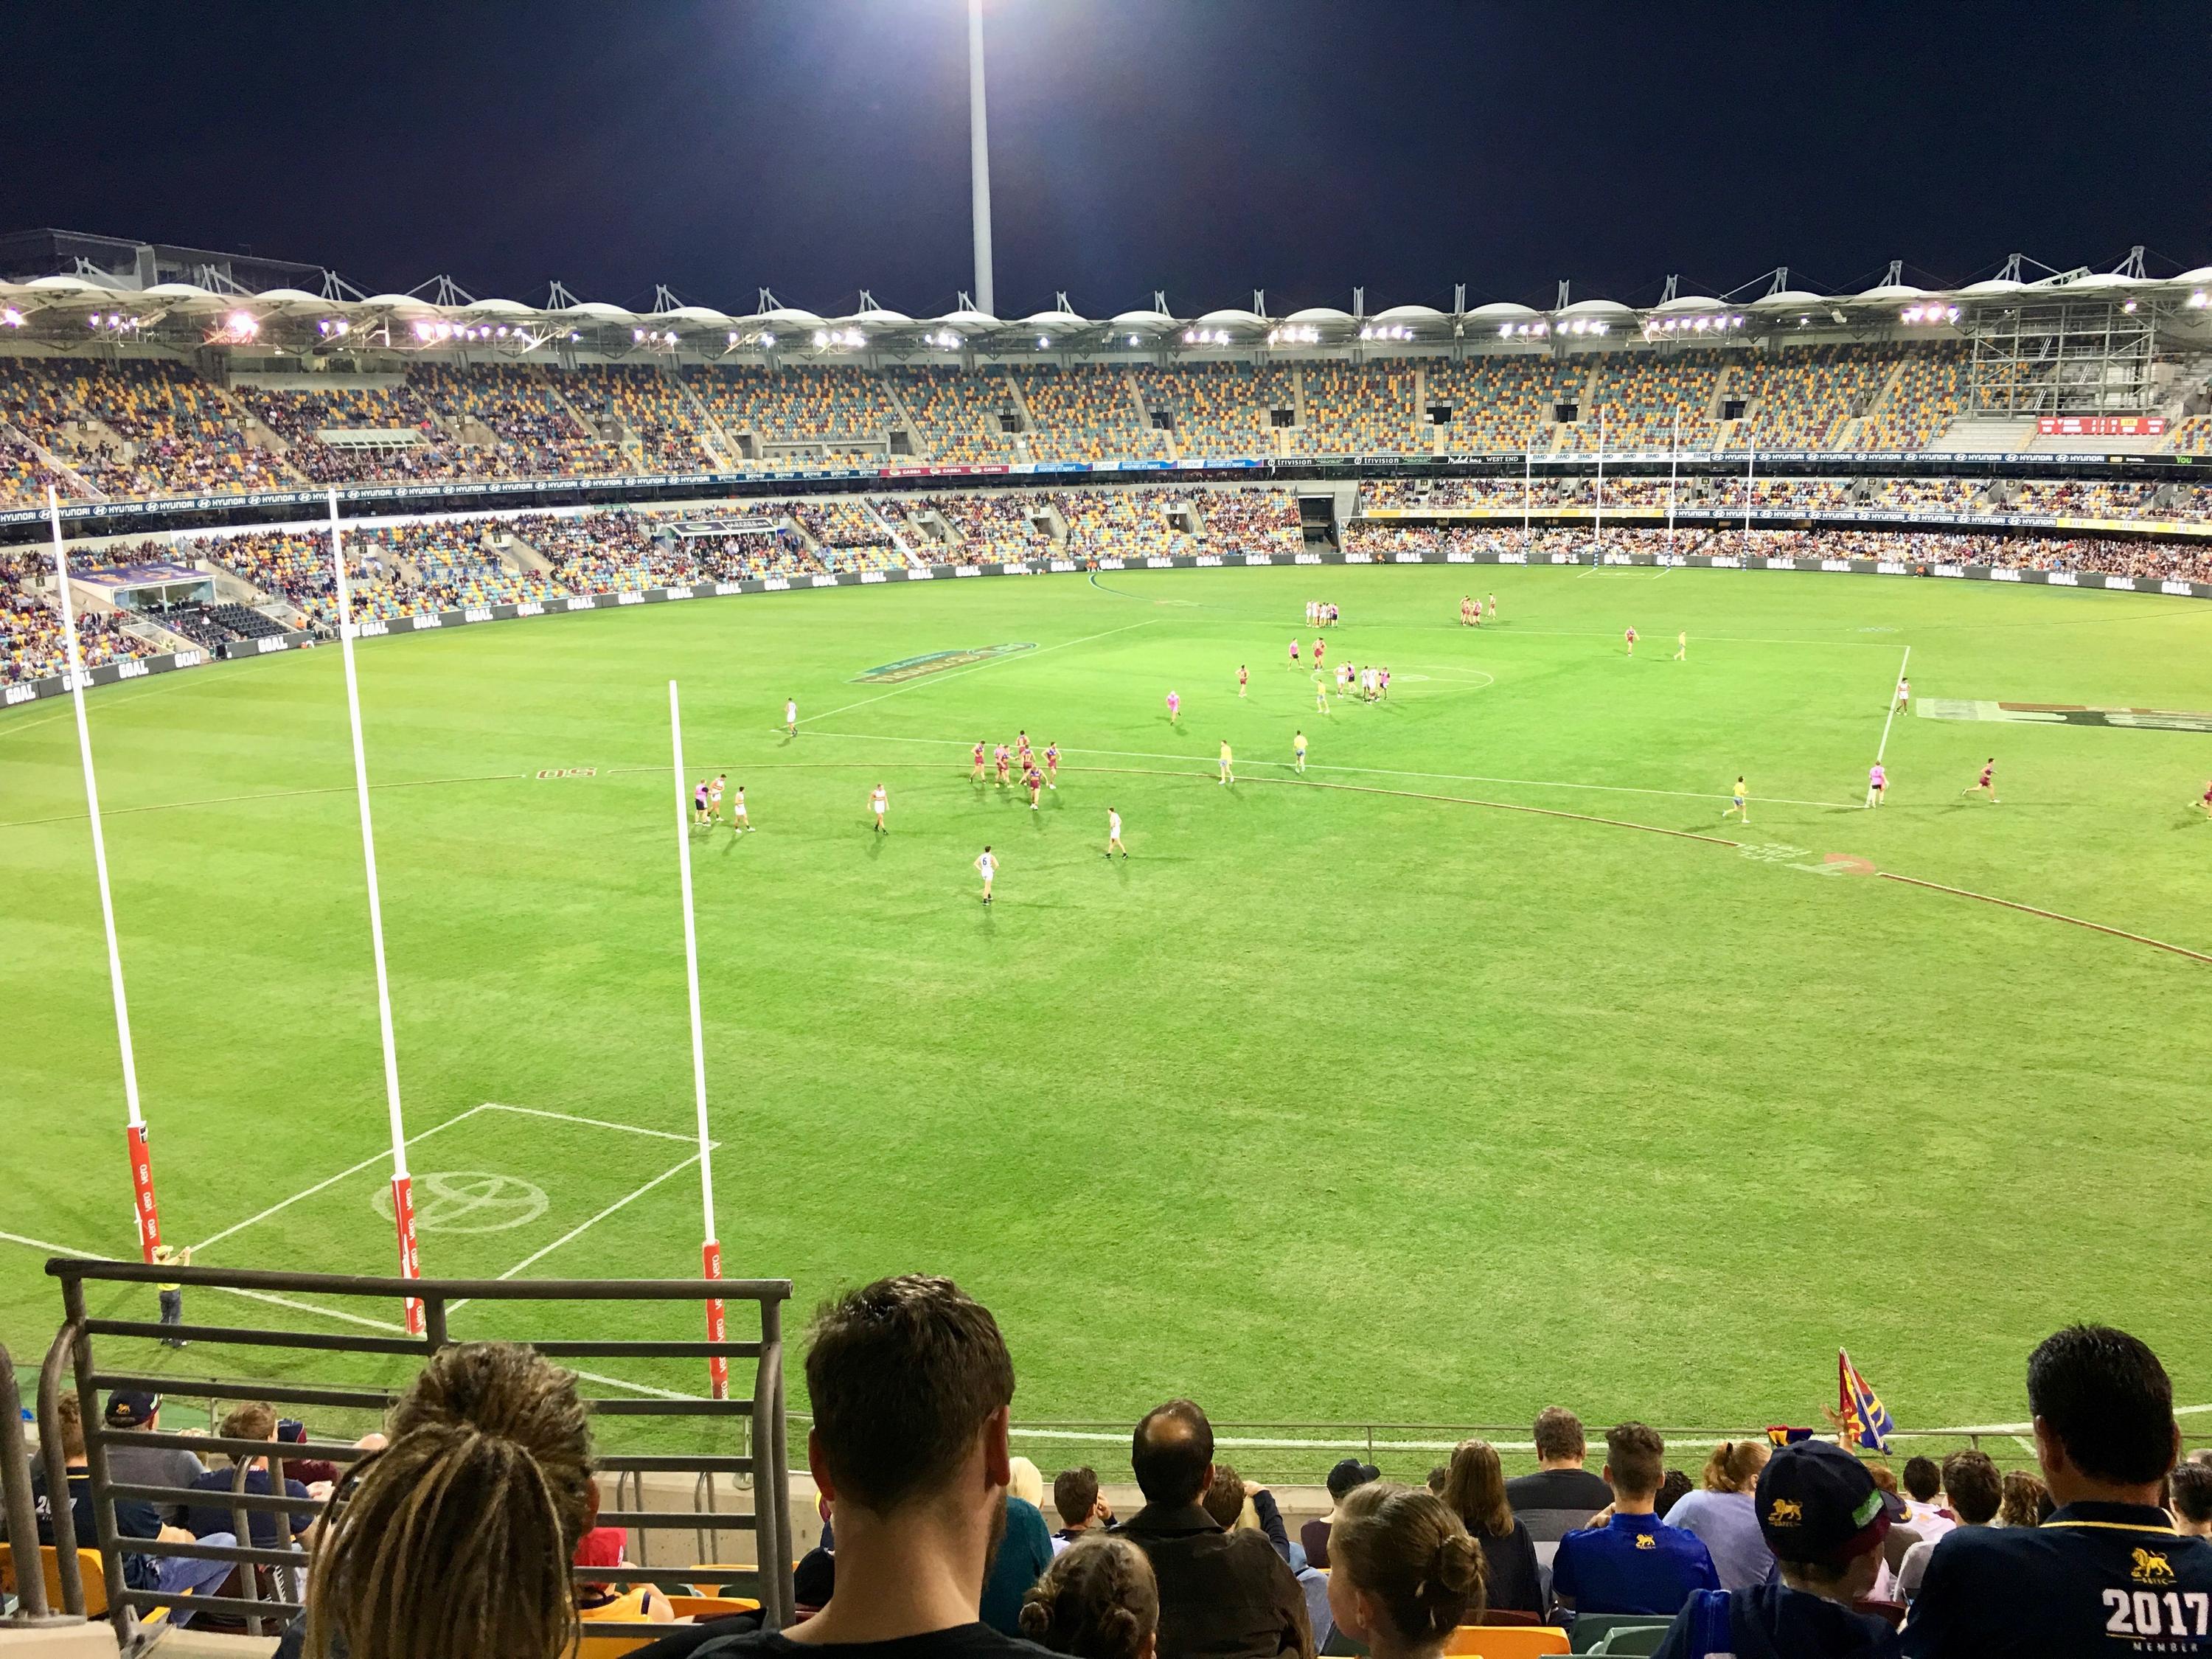 Stadium for australian football, filled with fans.